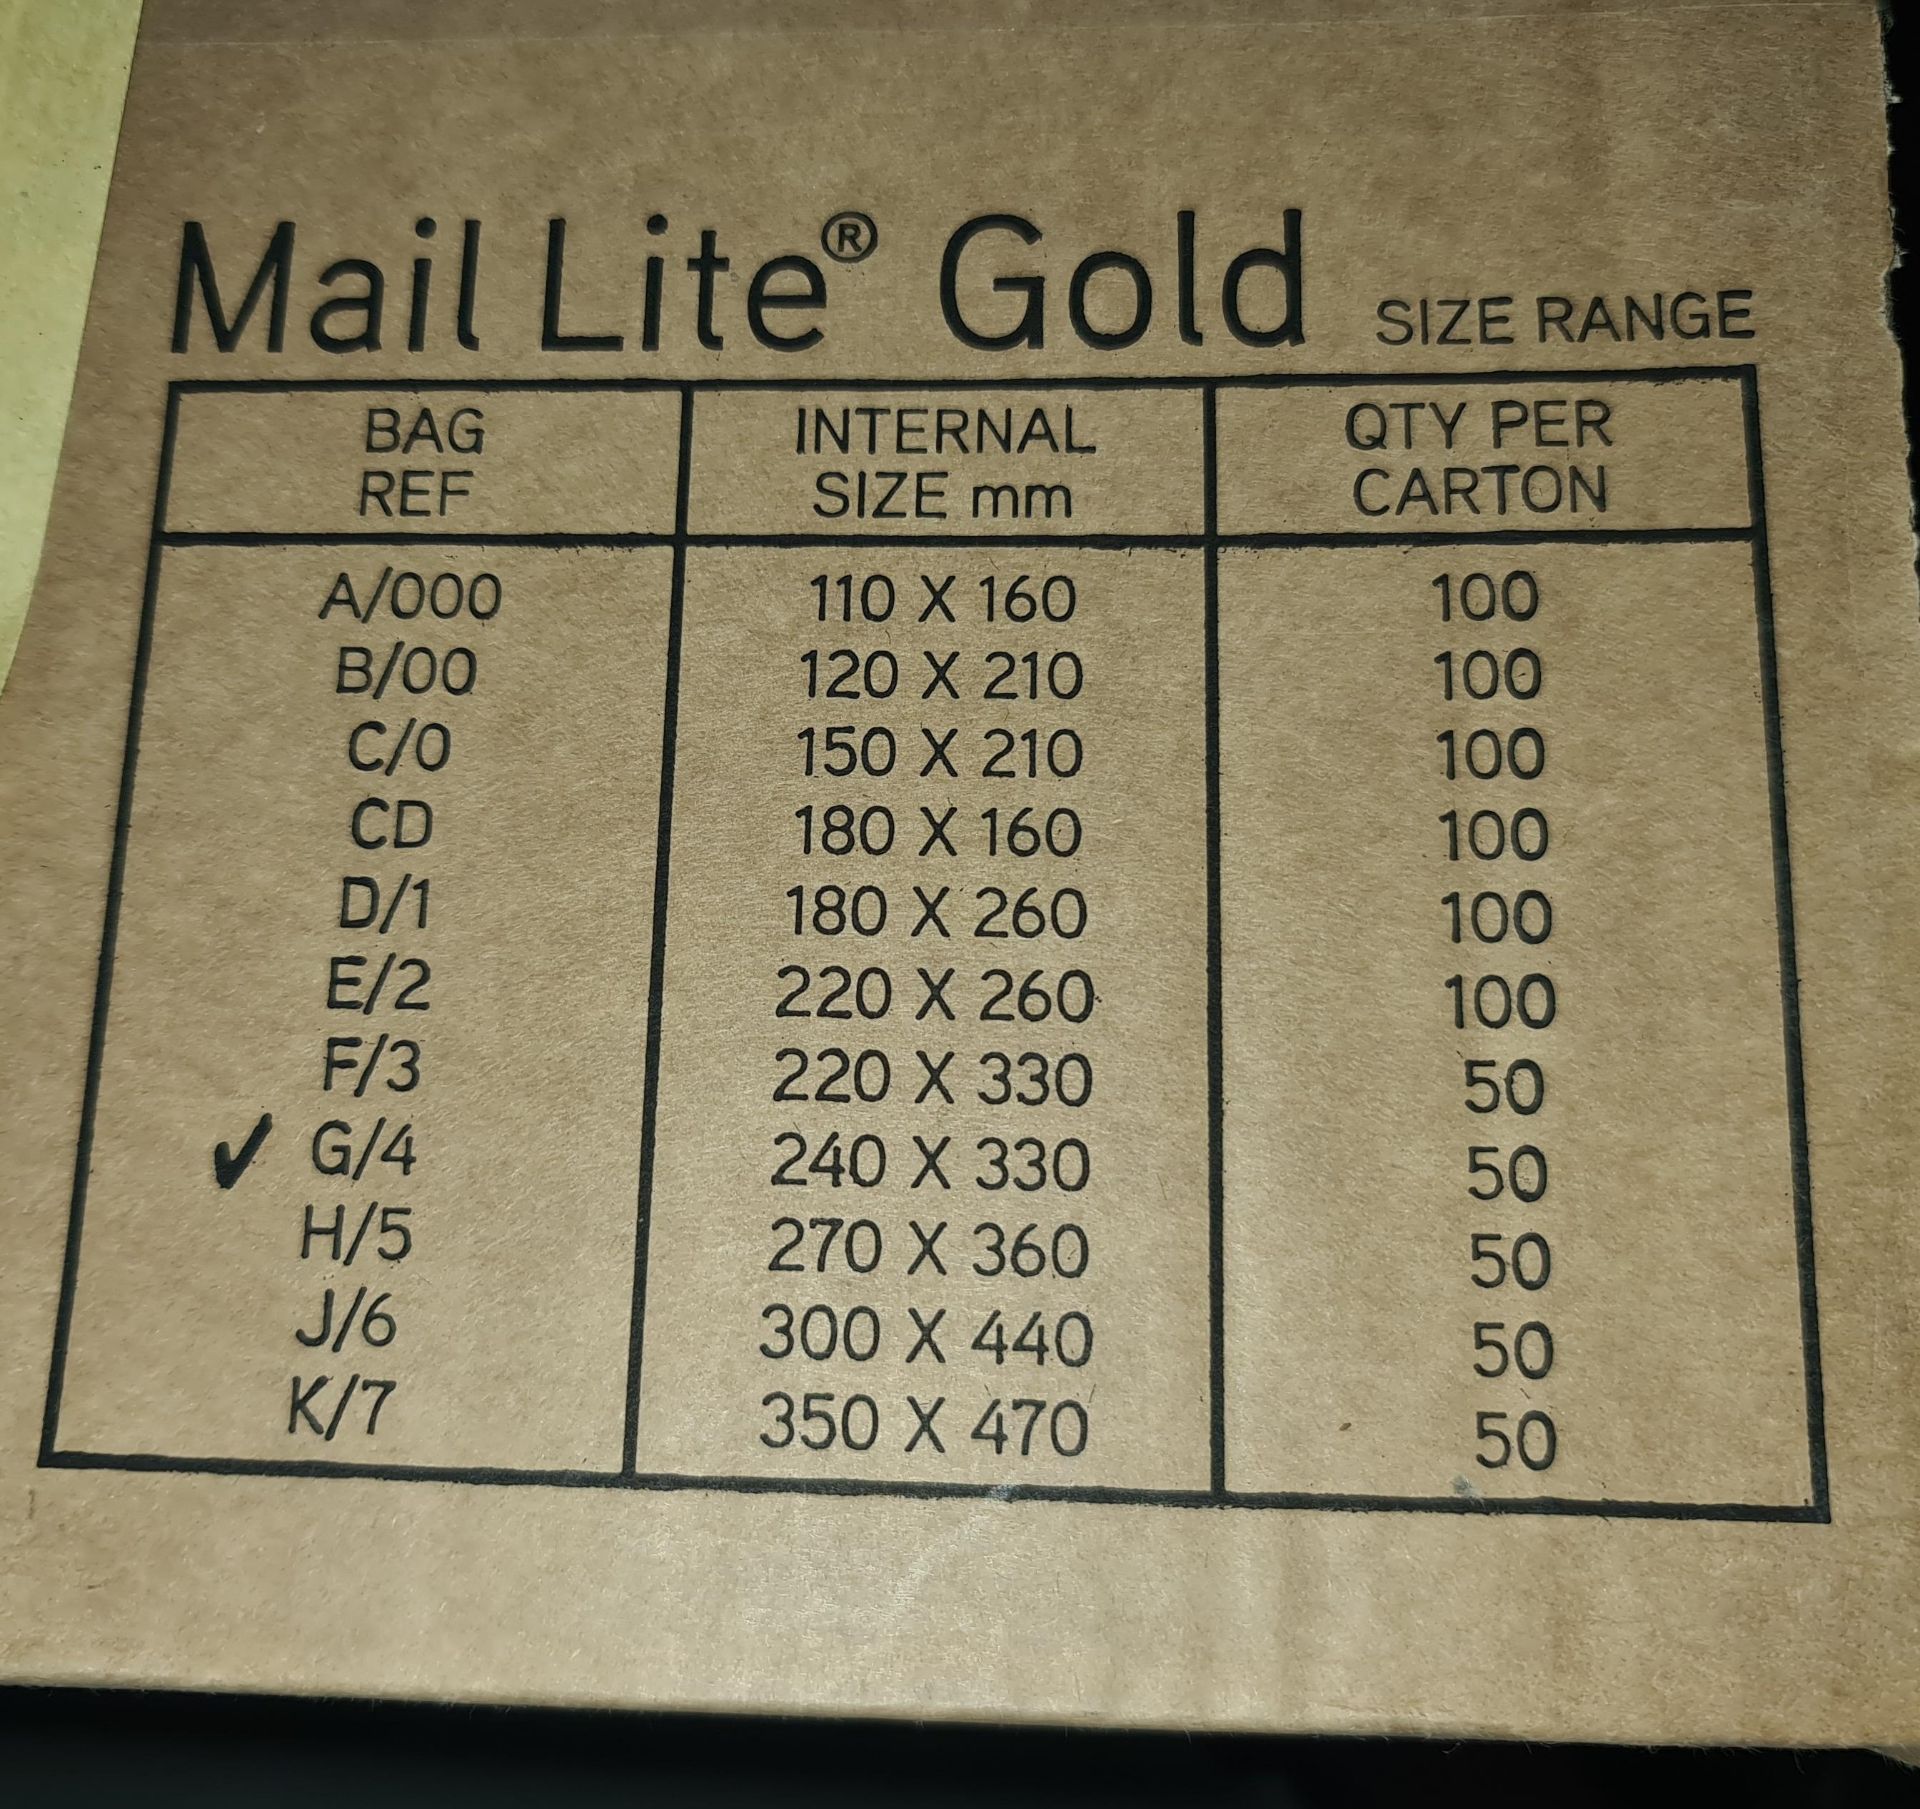 4 boxes of Sealed Air Mail Lite Gold G/4 padded envelopes - each box contains 50 envelopes which mea - Image 3 of 3